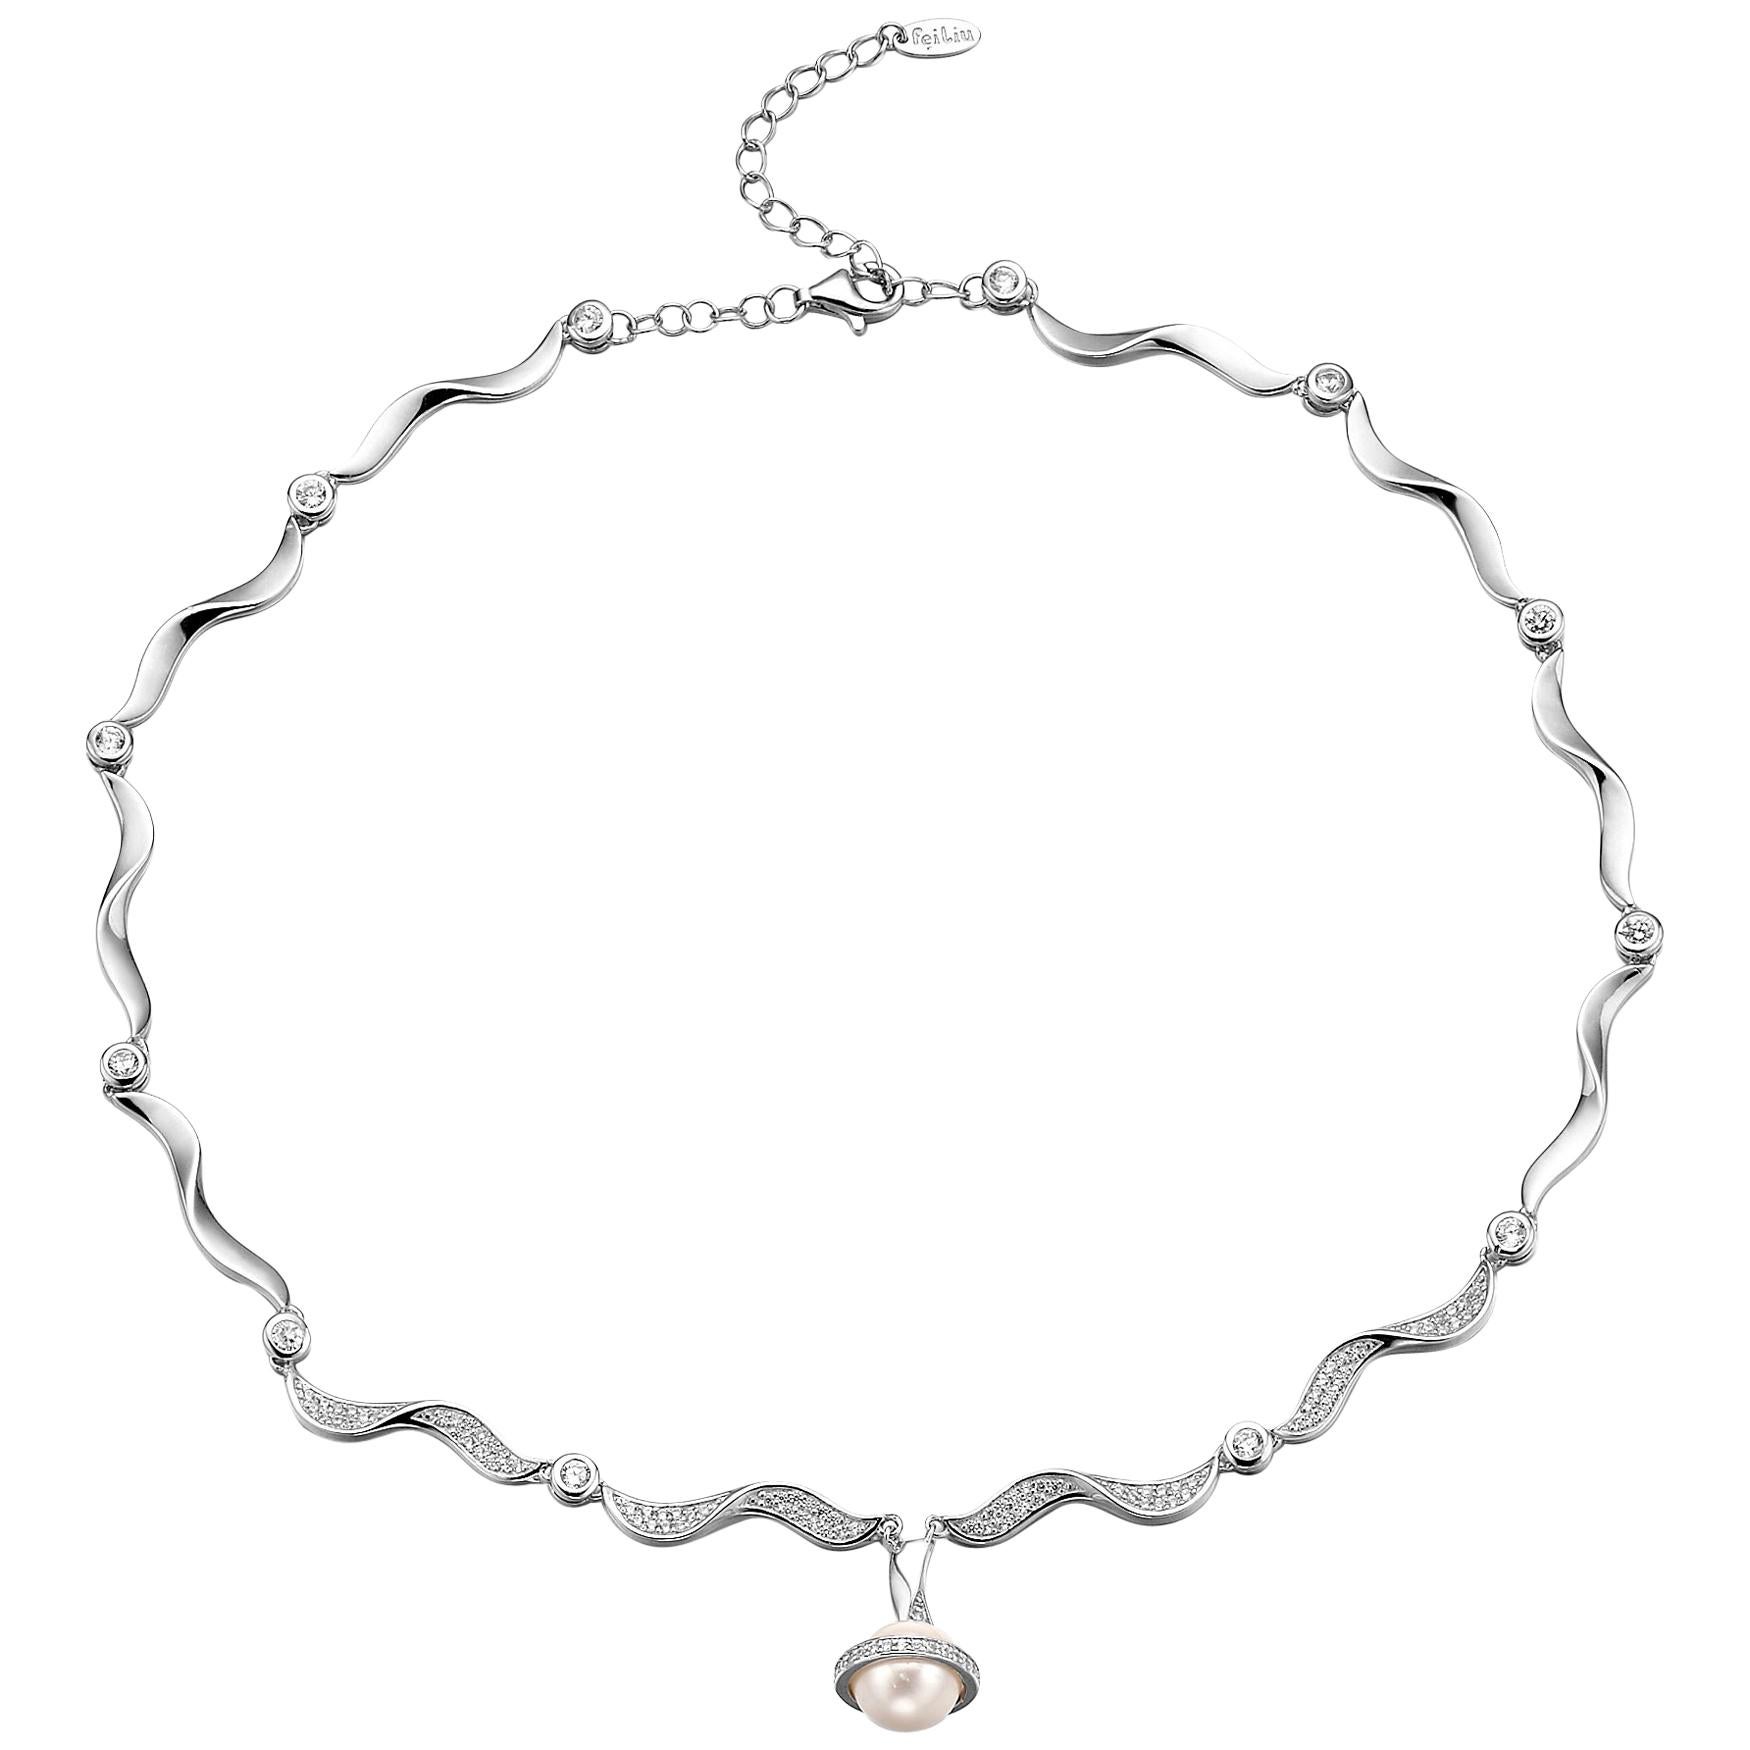 Fei Liu Pirouette Necklace Sliver with Fresh Water Pearl